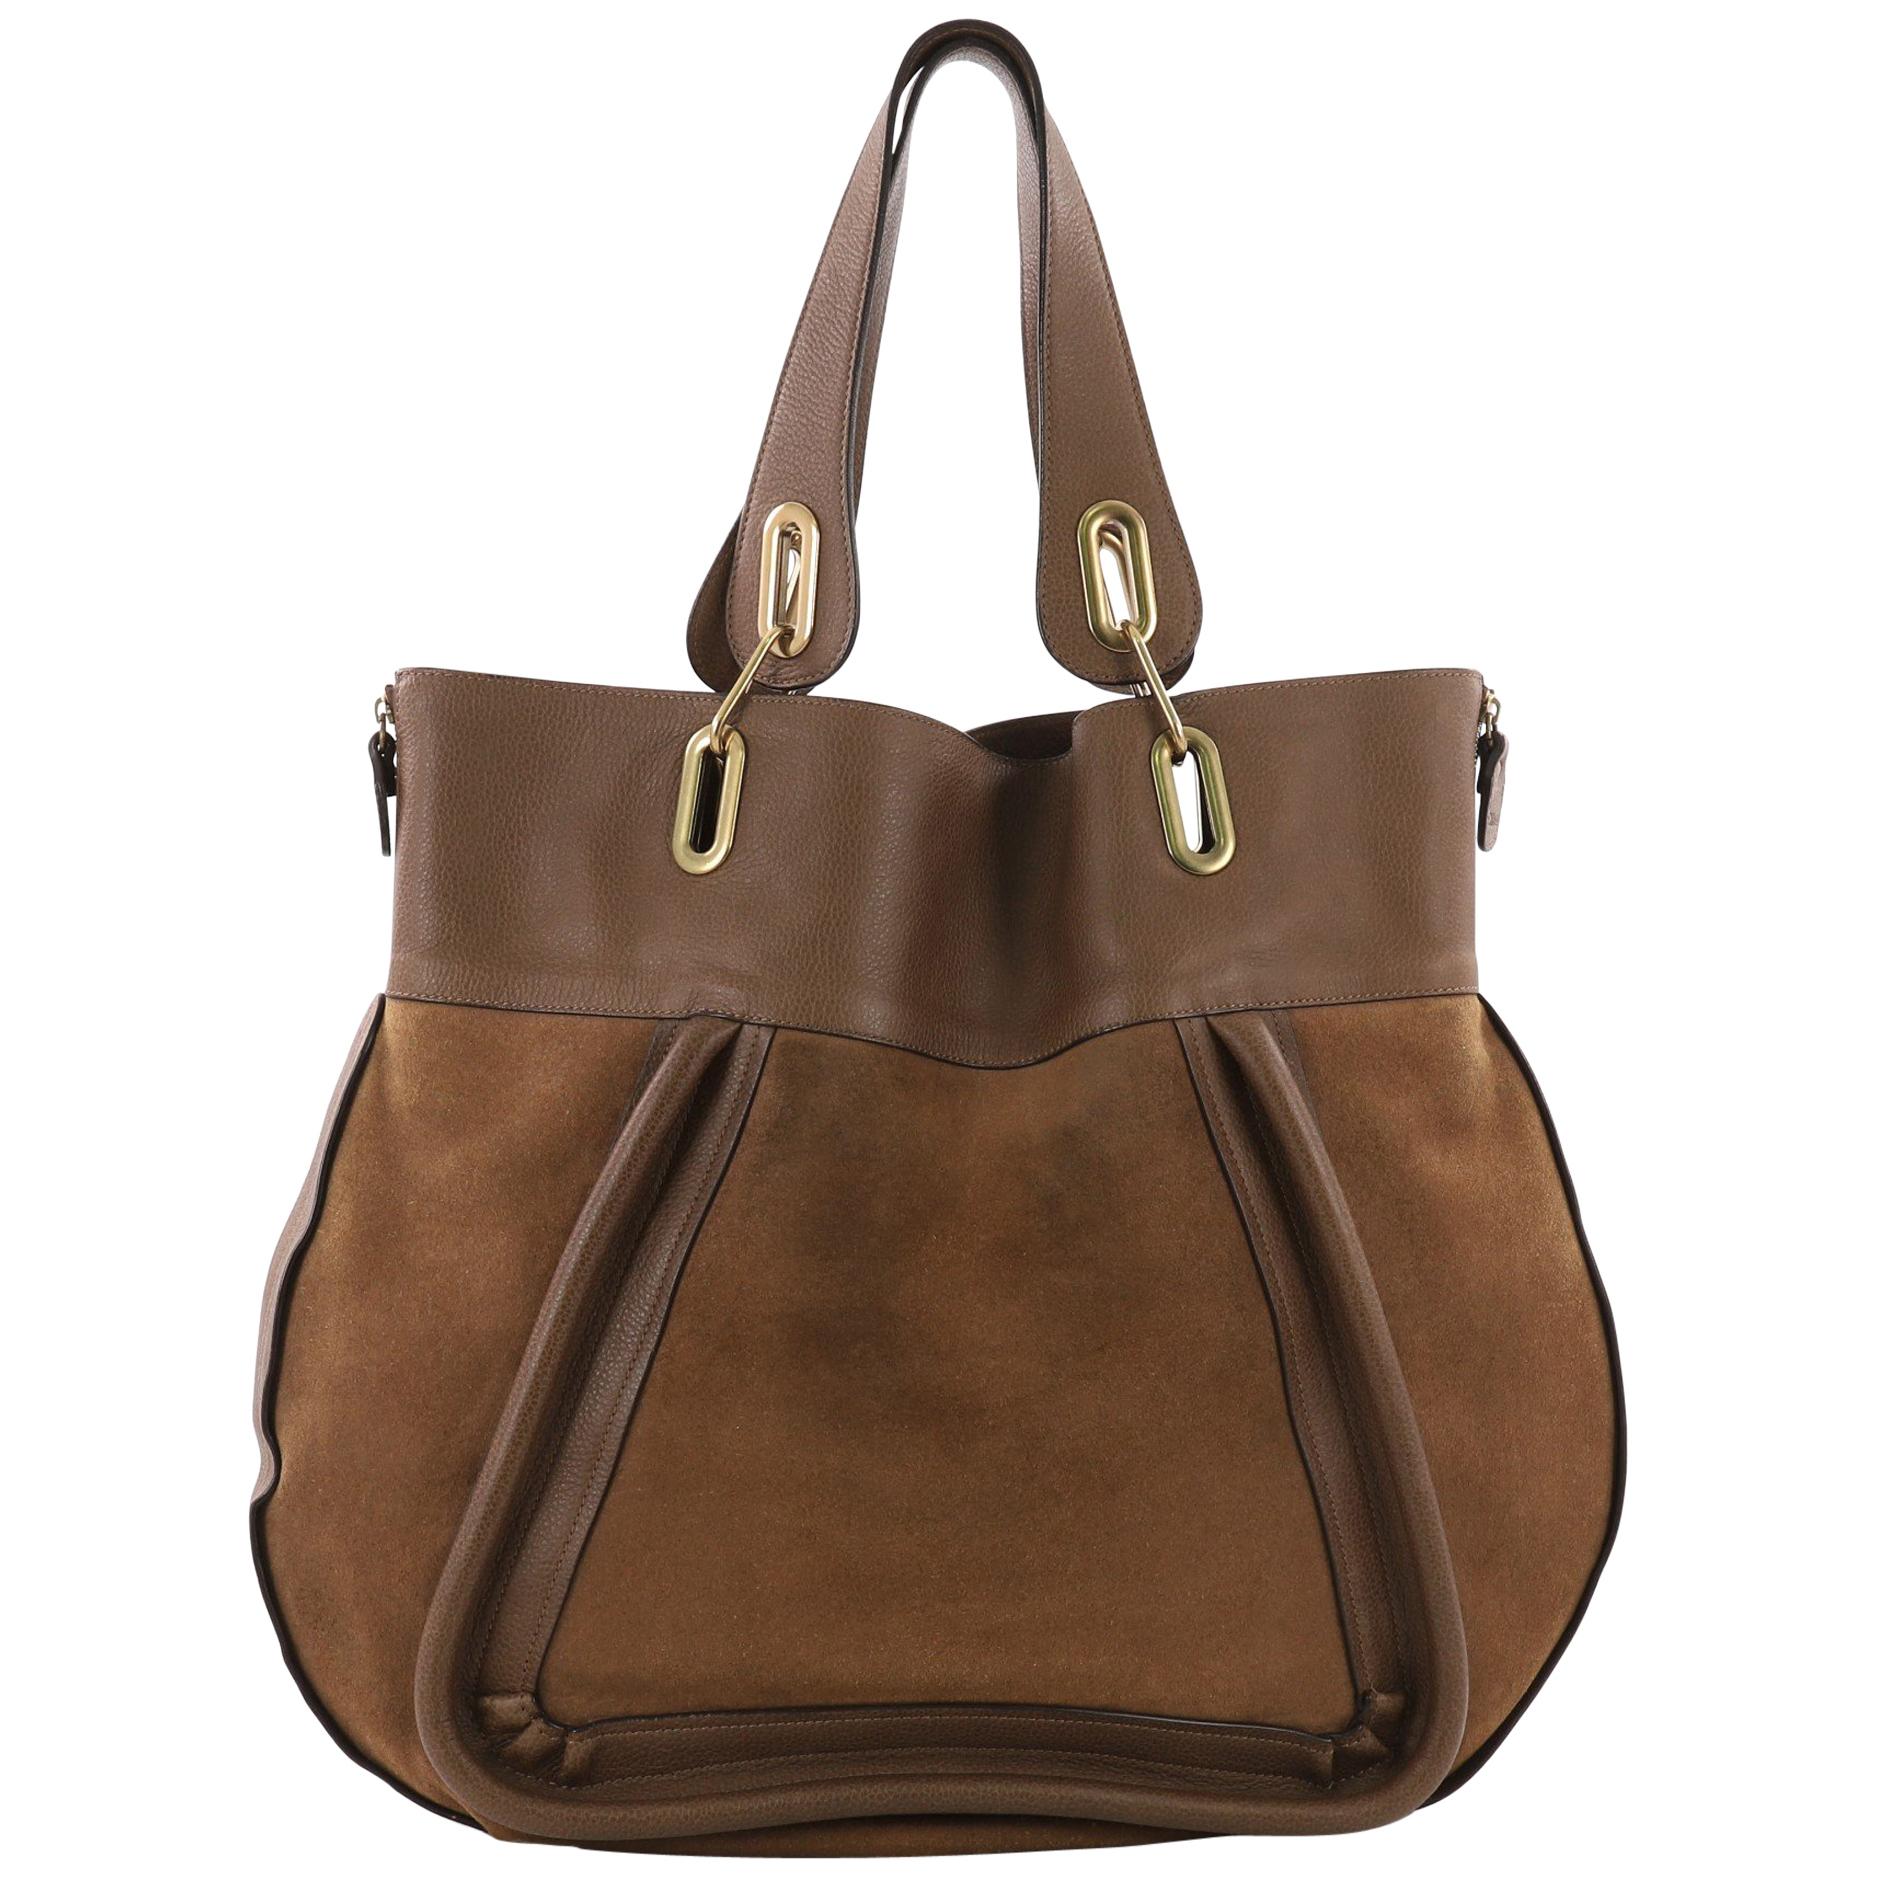 Chloe Paraty Side Zip Tote Suede with Leather Large